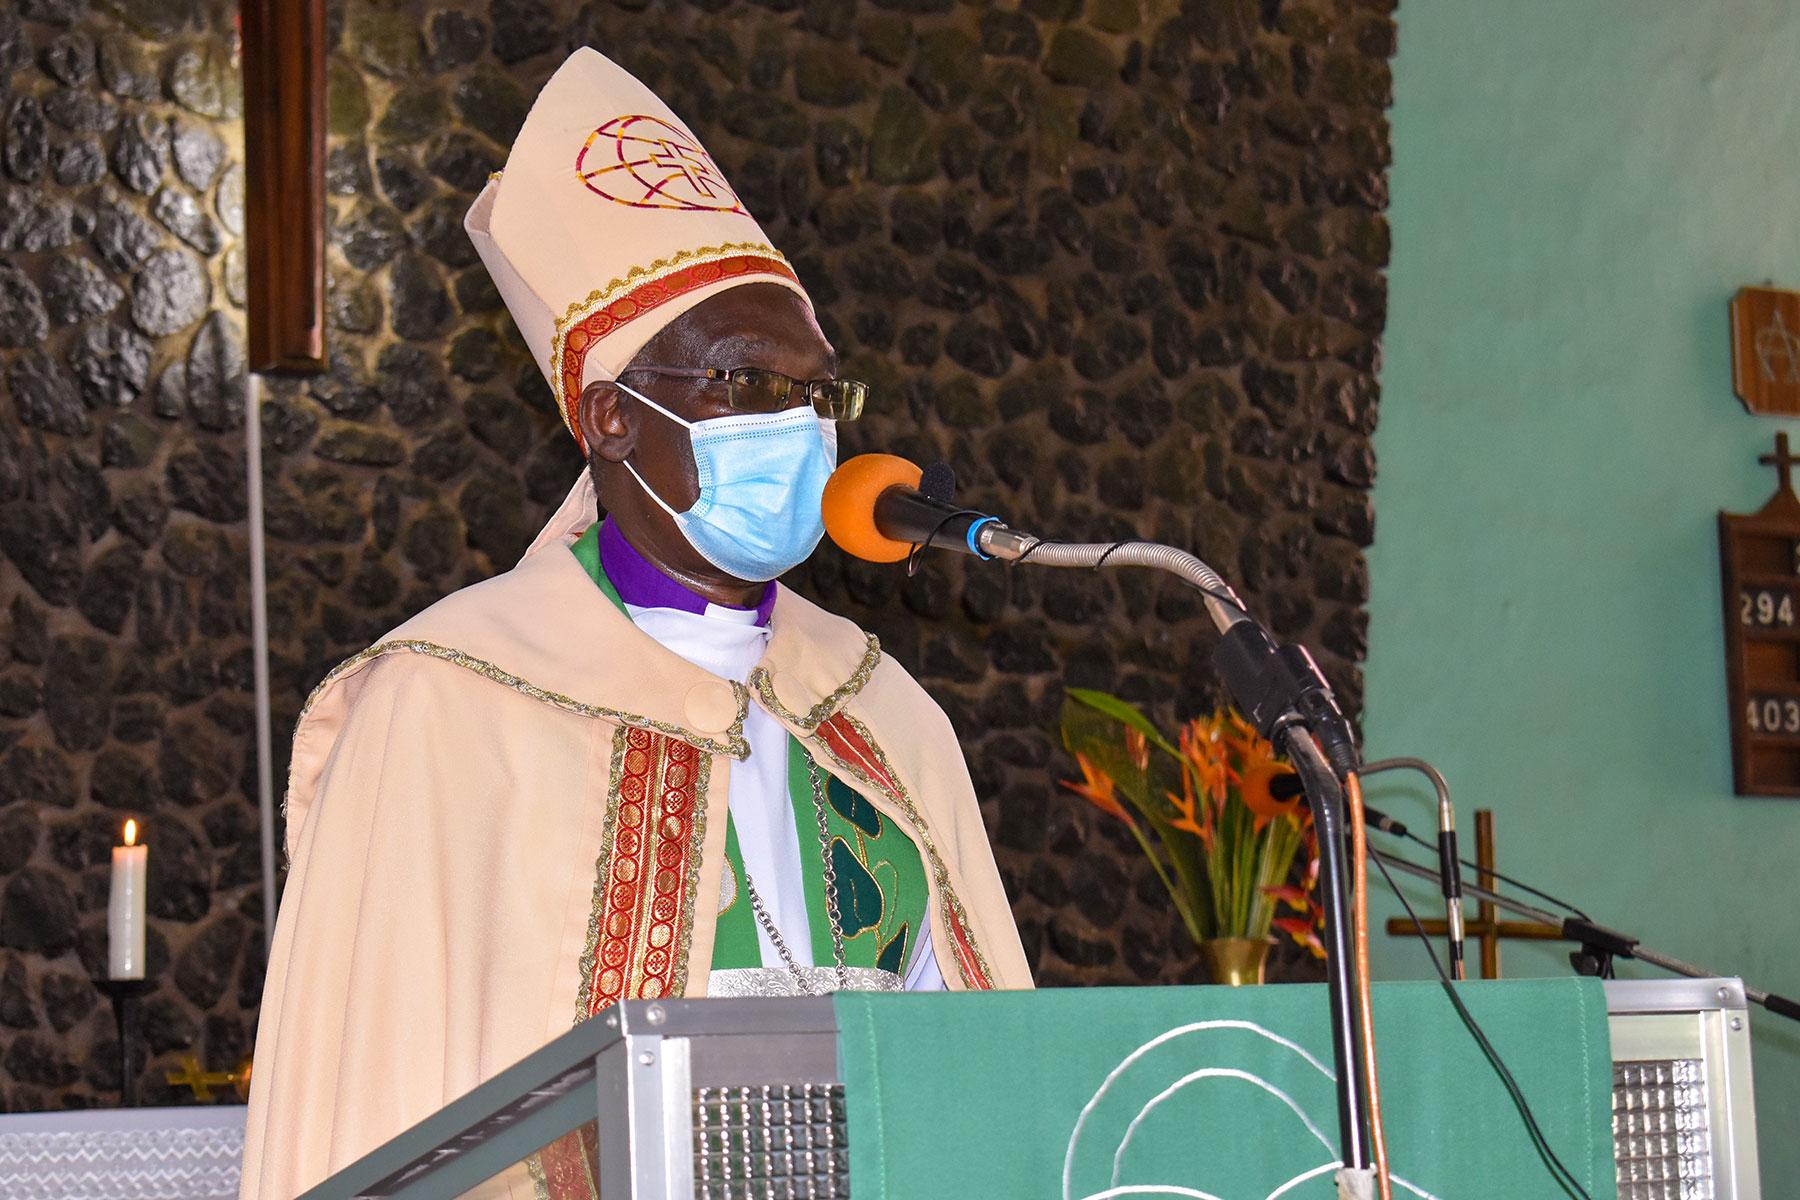 The Evangelical Lutheran Church in Tanzania (ELCT) Presiding Bishop Dr Fredrick O. Shoo wrote that education is one tool churches can use to prevent the spread of COVID-19. Photo:ELCT/Erick Adolph